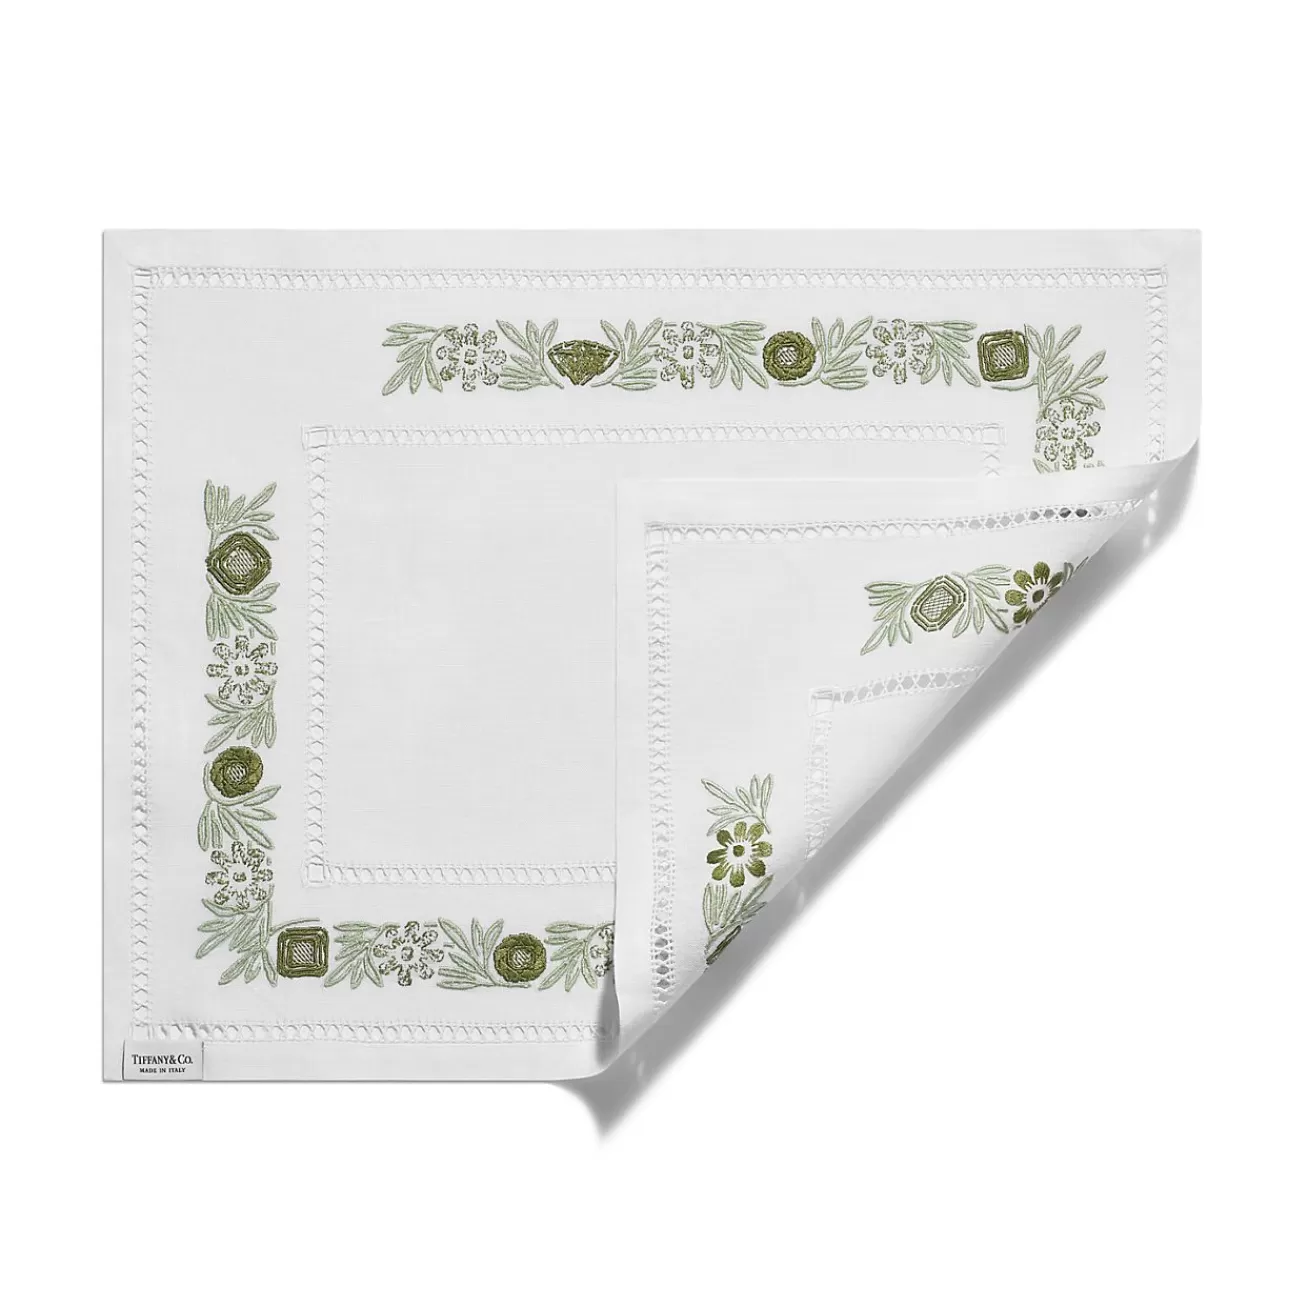 Tiffany & Co. Tiffany Heritage Place Mats Set of Four, in Jade Green Linen | ^ Table Linens